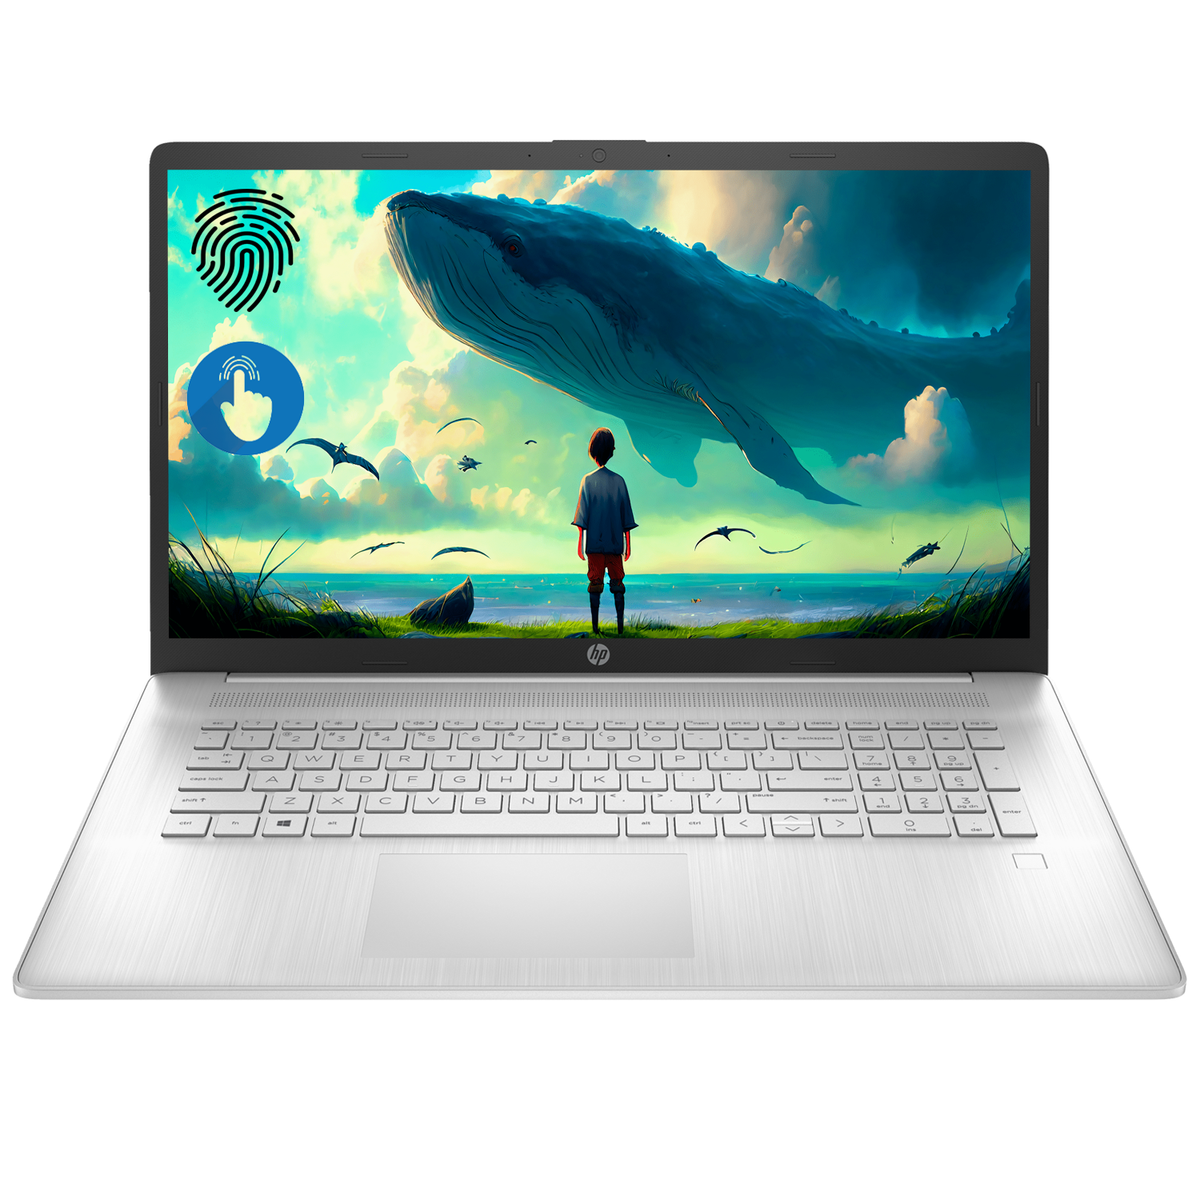 HP Essential Daily Traditional Laptop, 17.3" HD+ 1600*900 Touchscreen 60Hz, Intel N-Series N200, Intel UHD Graphics, 8GB DDR4 SODIMM, 1TB PCIe M.2 SSD, Wi-Fi 6, Non-backlit Keyboard, Windows 11 Home, Silver